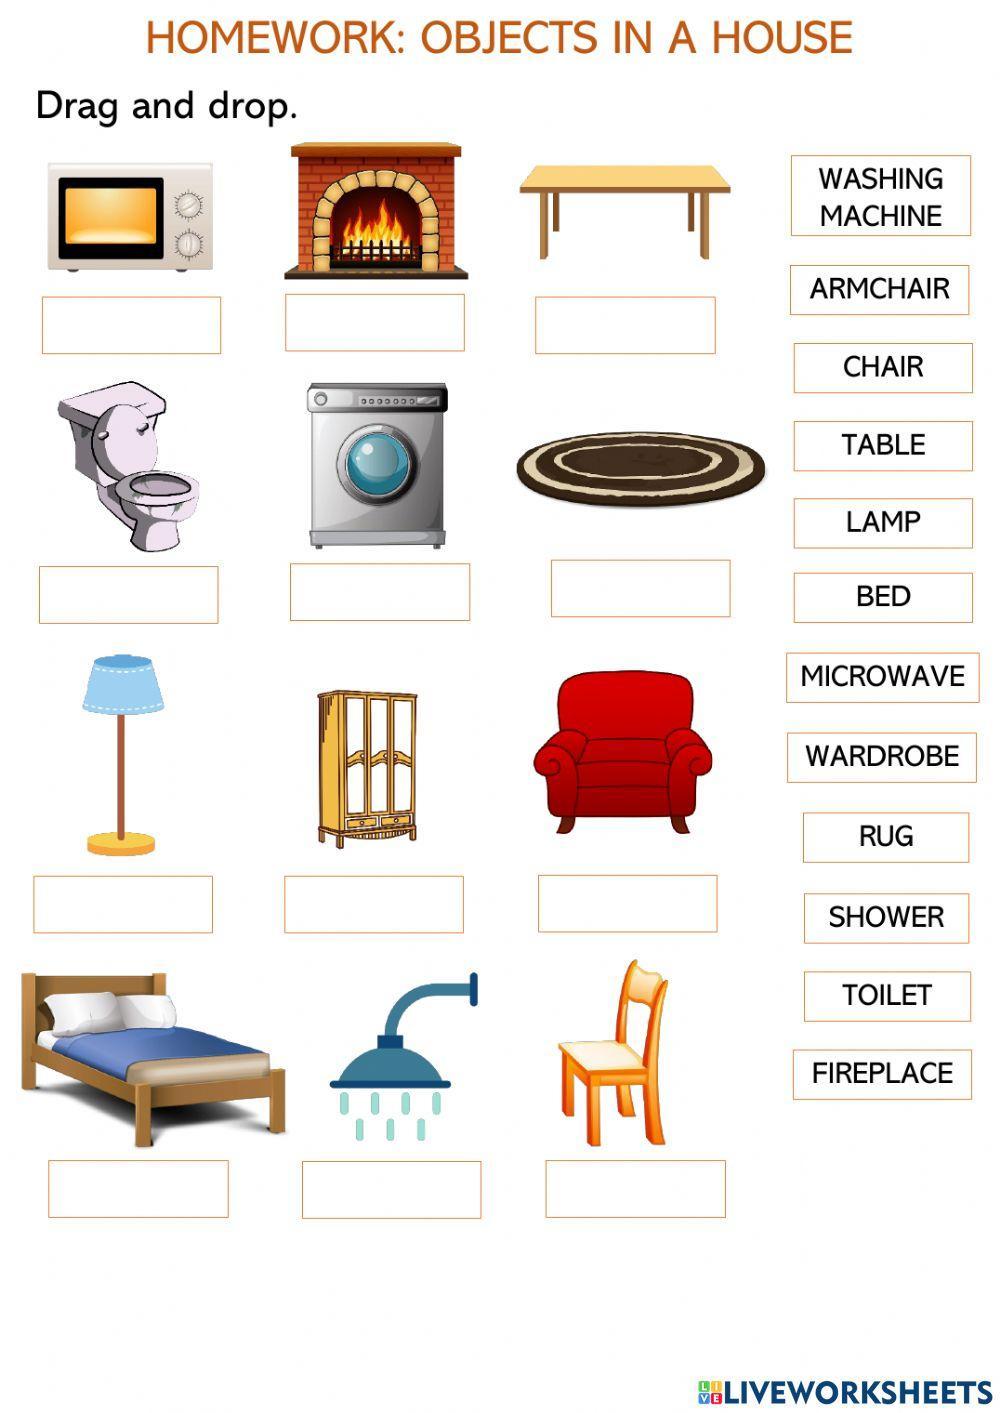 Objects in a House online exercise